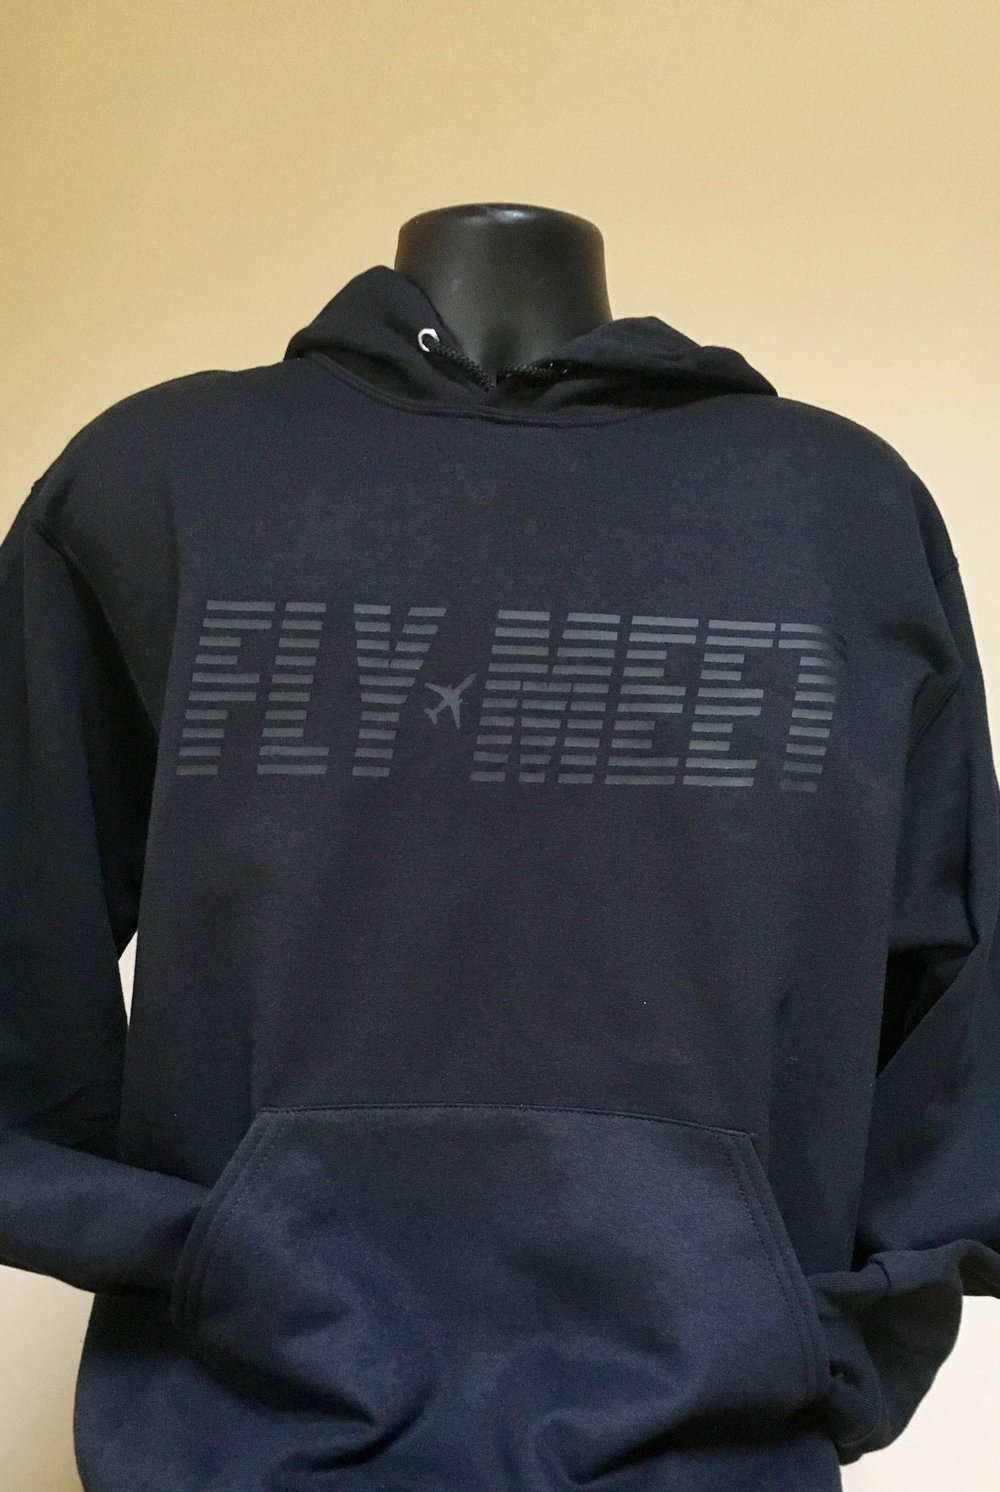 Image of Fly Meet Company - Hooded Sweatshirt (Stealth Bomber)